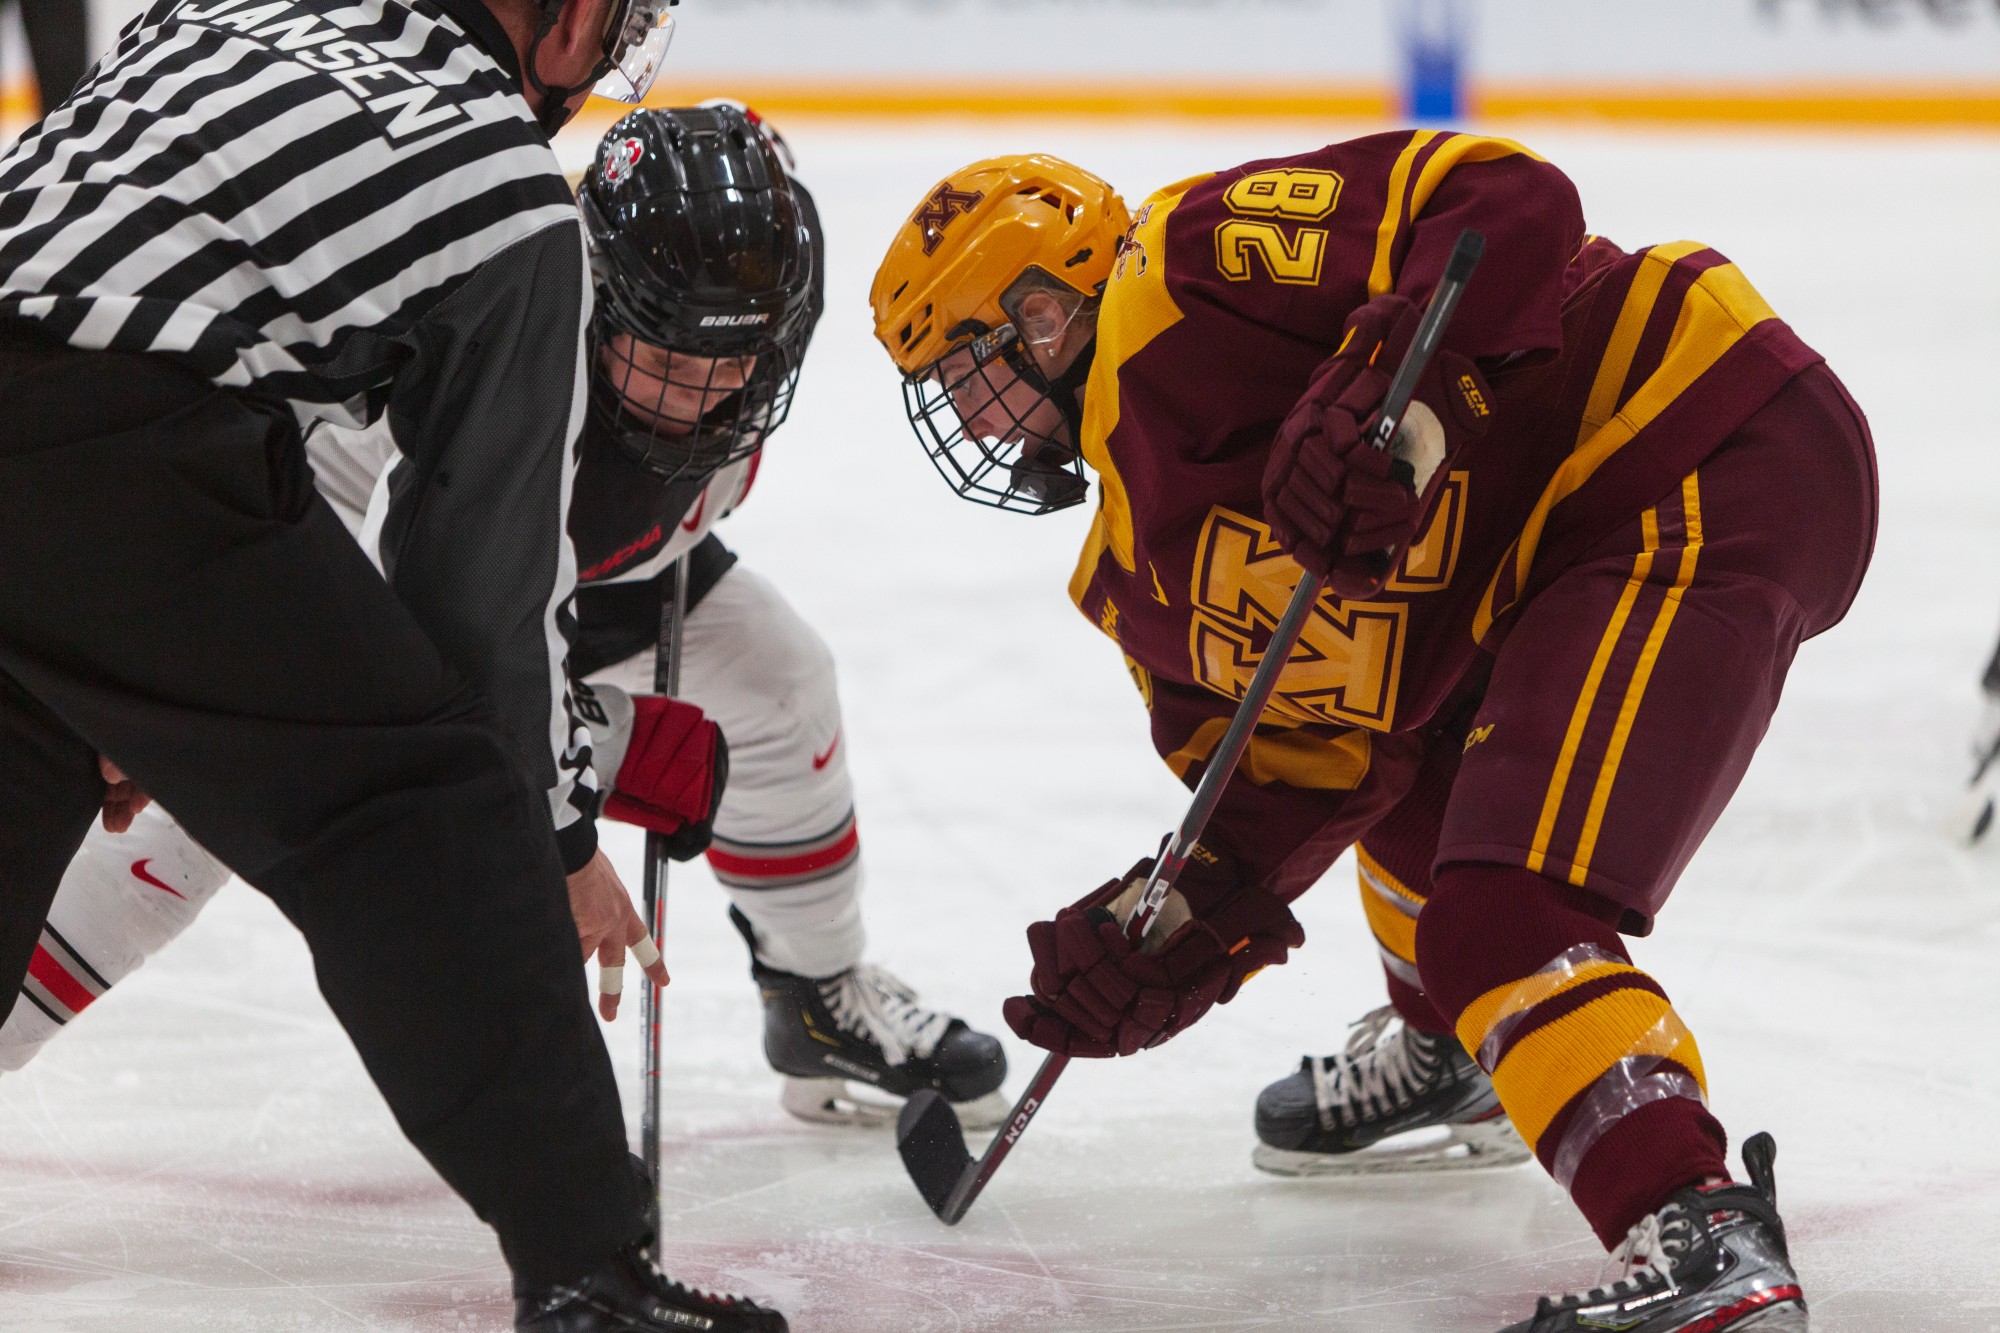 Gophers Forward Taylor Wente waits for the puck to drop at Ridder Arena on Friday, Jan. 17.  Minnesota suffered a 1-4 loss to Ohio State. (Kamaan Richards / Minnesota Daily)